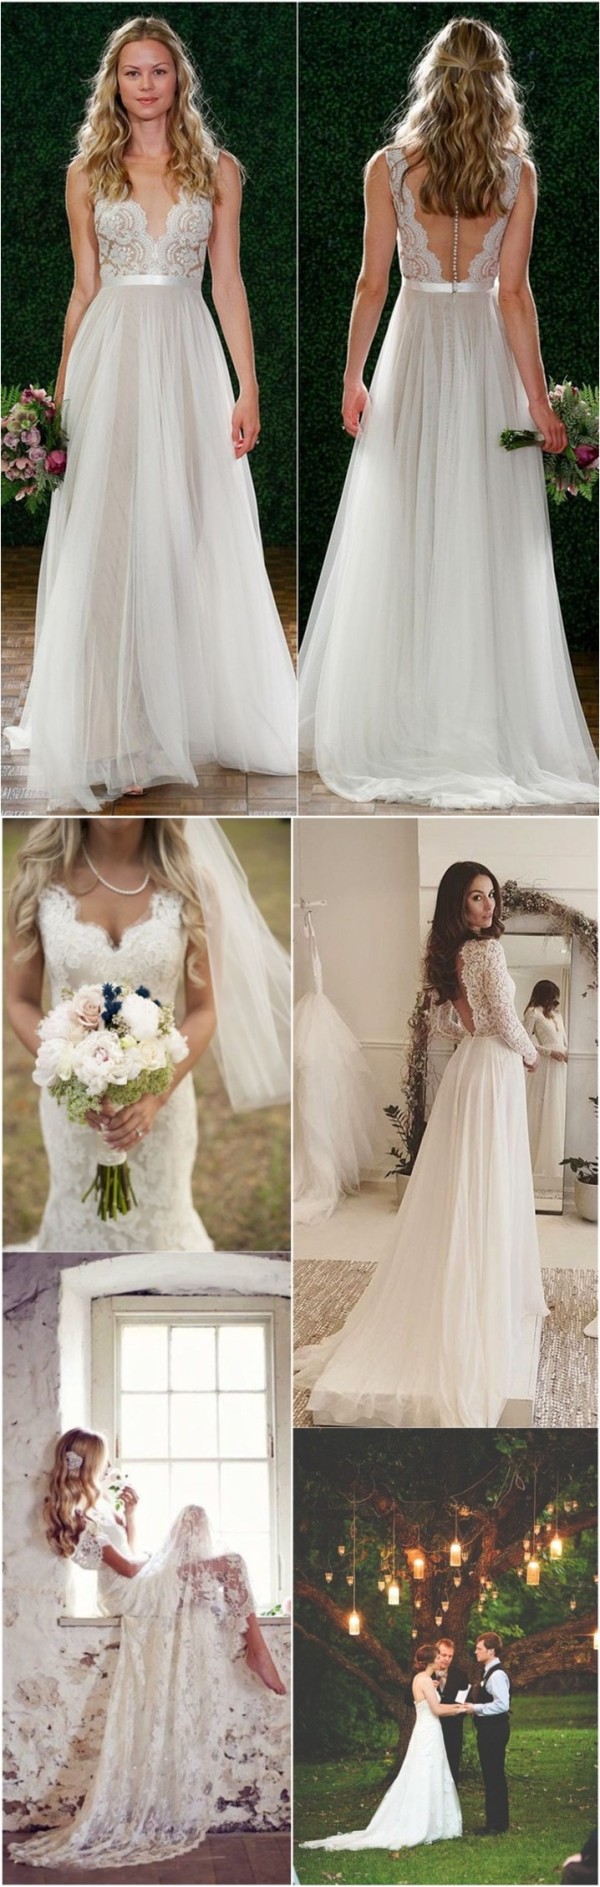 Rustic country wedding dresses ideas